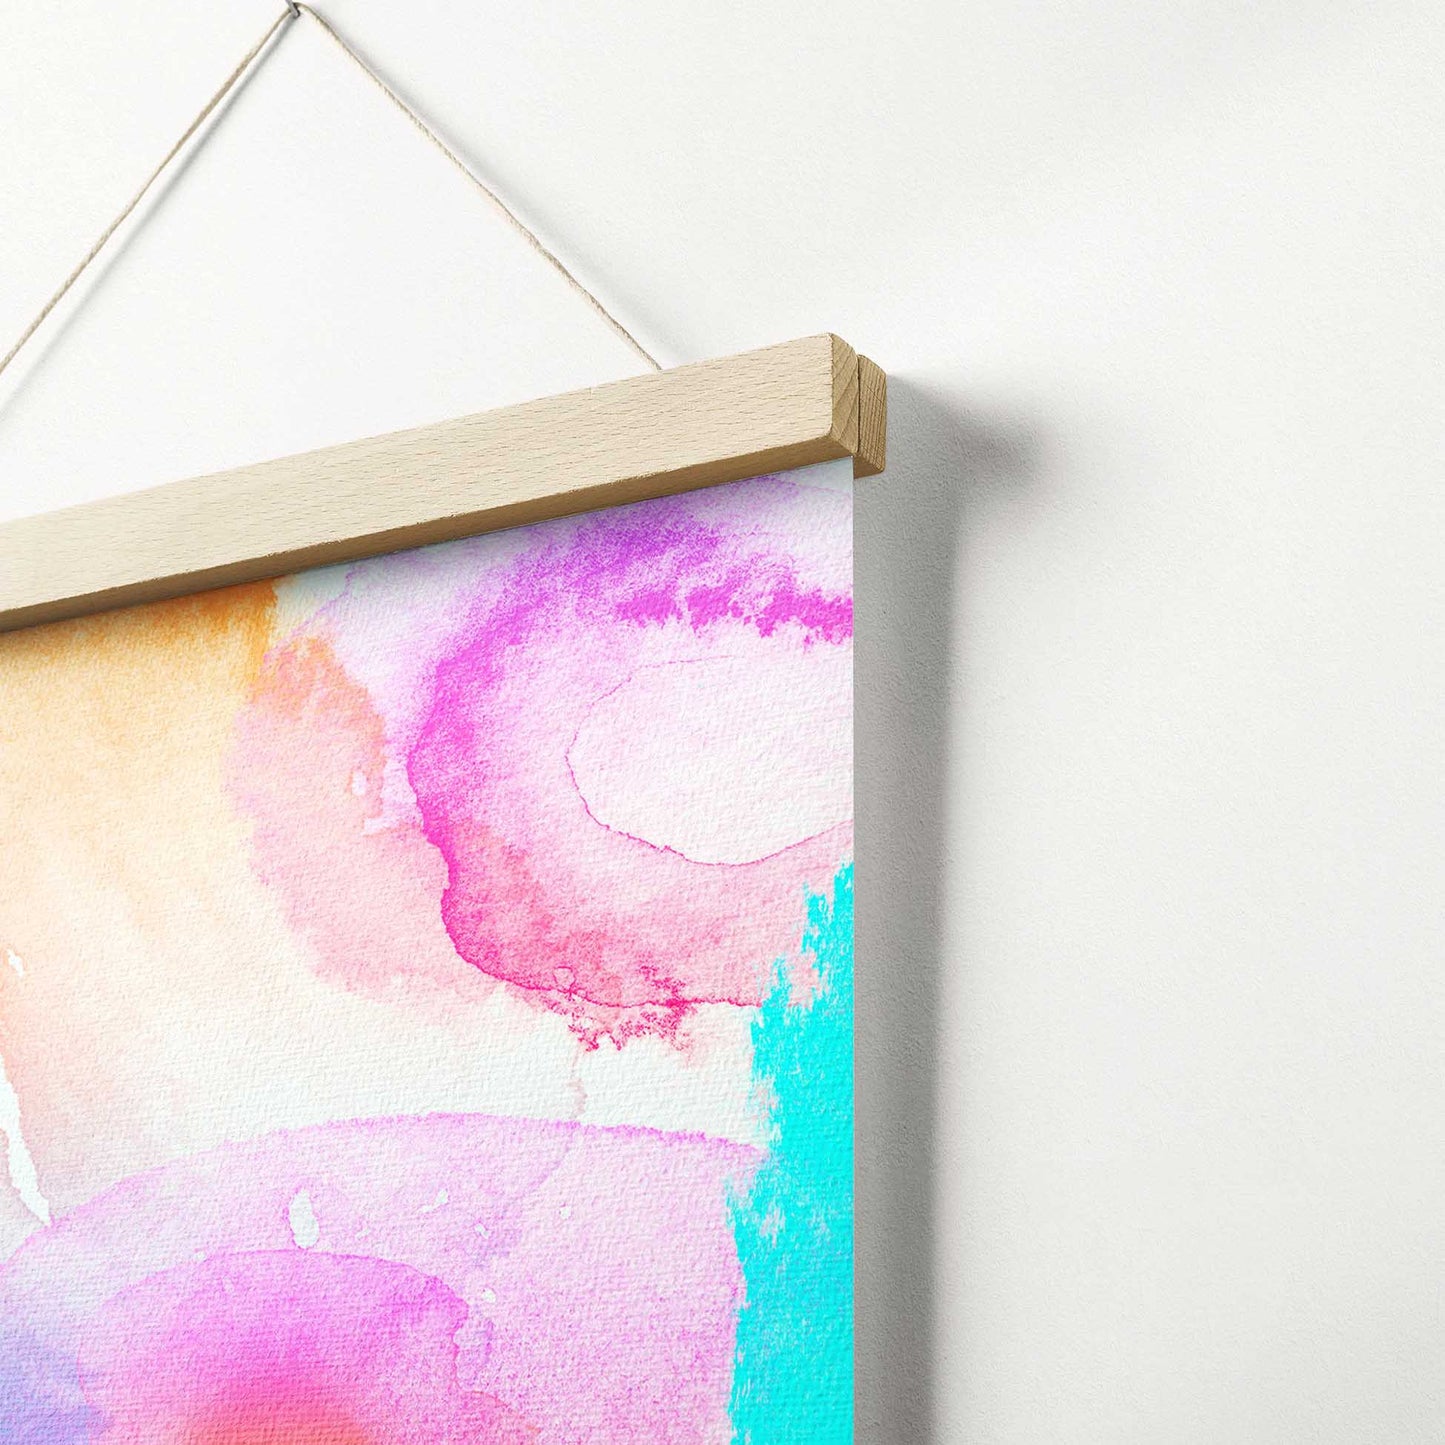 Personalise your space with the Personalised Pink Pop Art Poster Hanger. Crafted from your photo with a retro pop art effect and halftone filter, it showcases pink hues that are fresh and vibrant